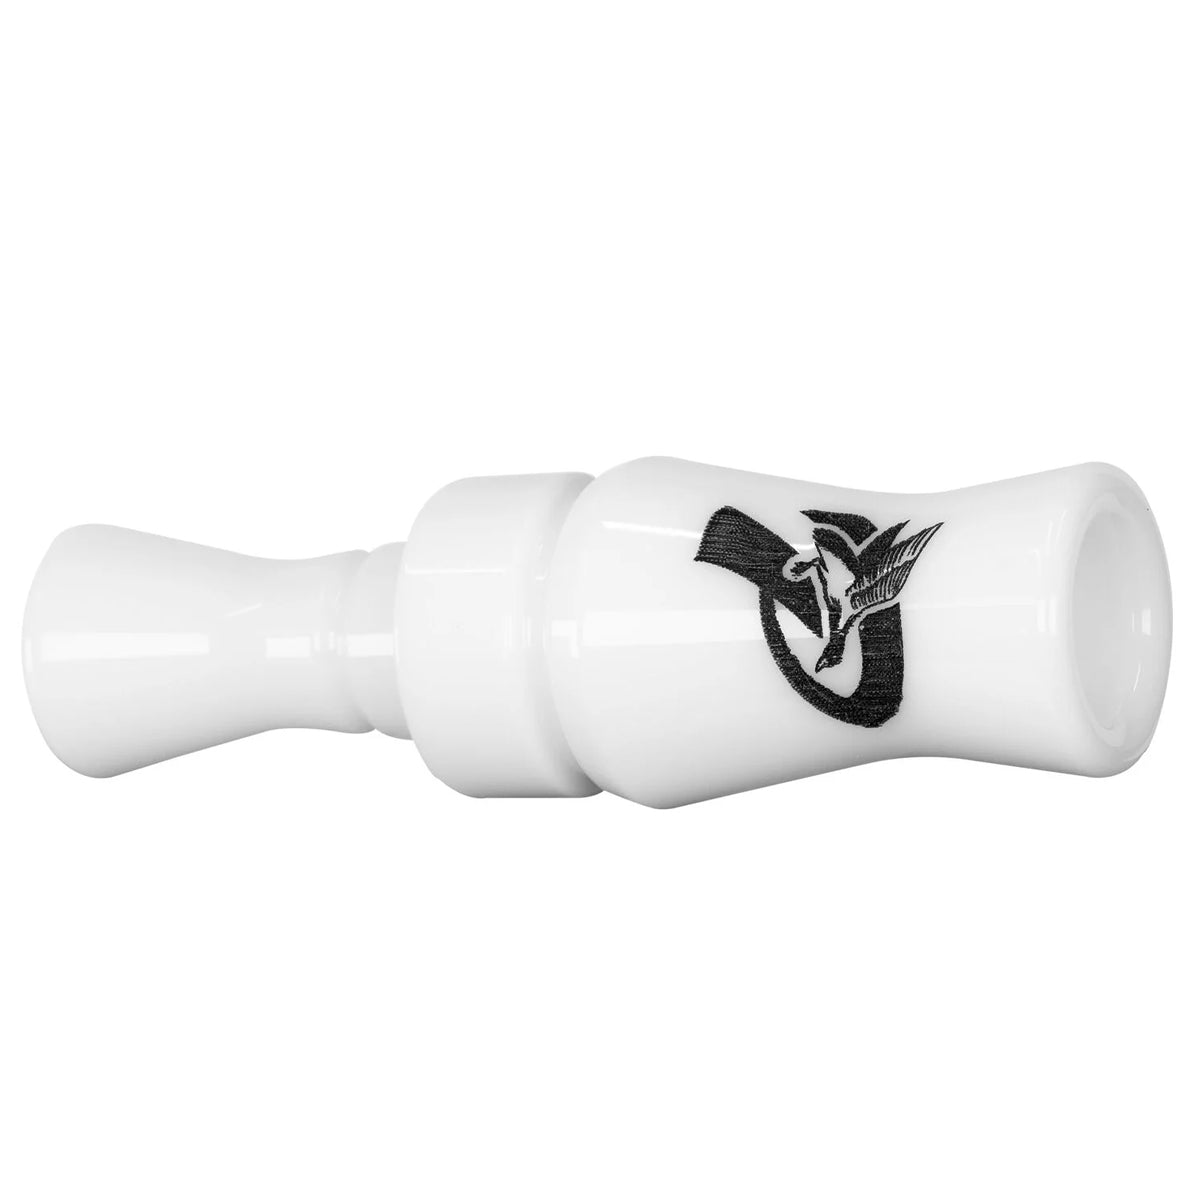 Phelps PD SINGLE PRO DUCK CALL in  by GOHUNT | Phelps Game Calls - GOHUNT Shop